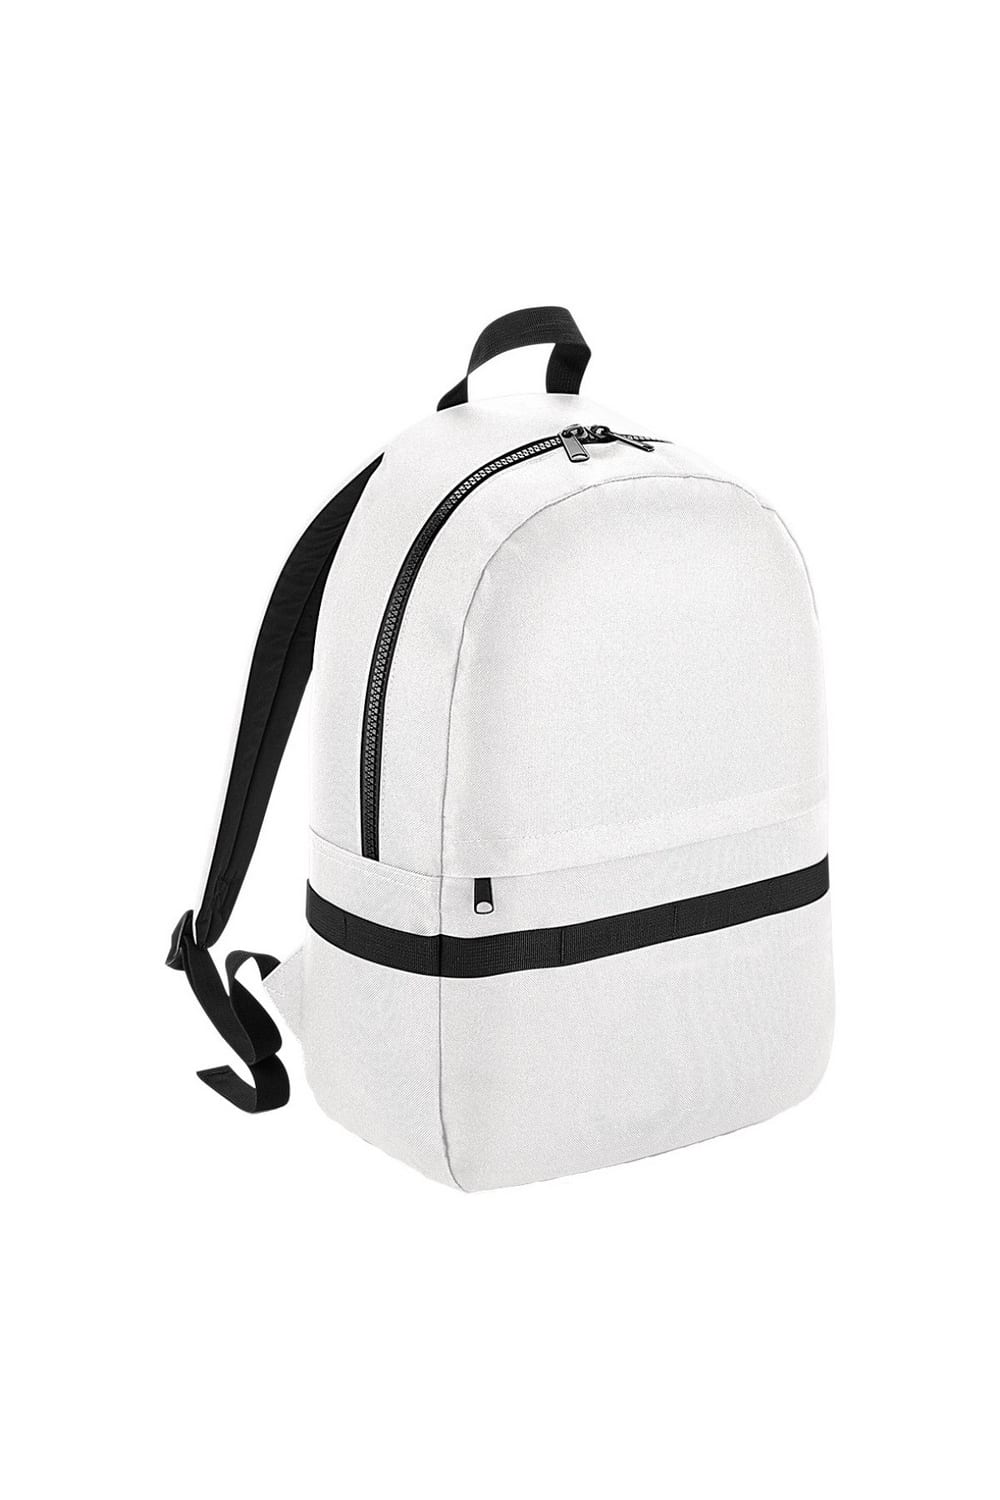 Adults Unisex Modulr 5.2 Gallon Backpack (White)